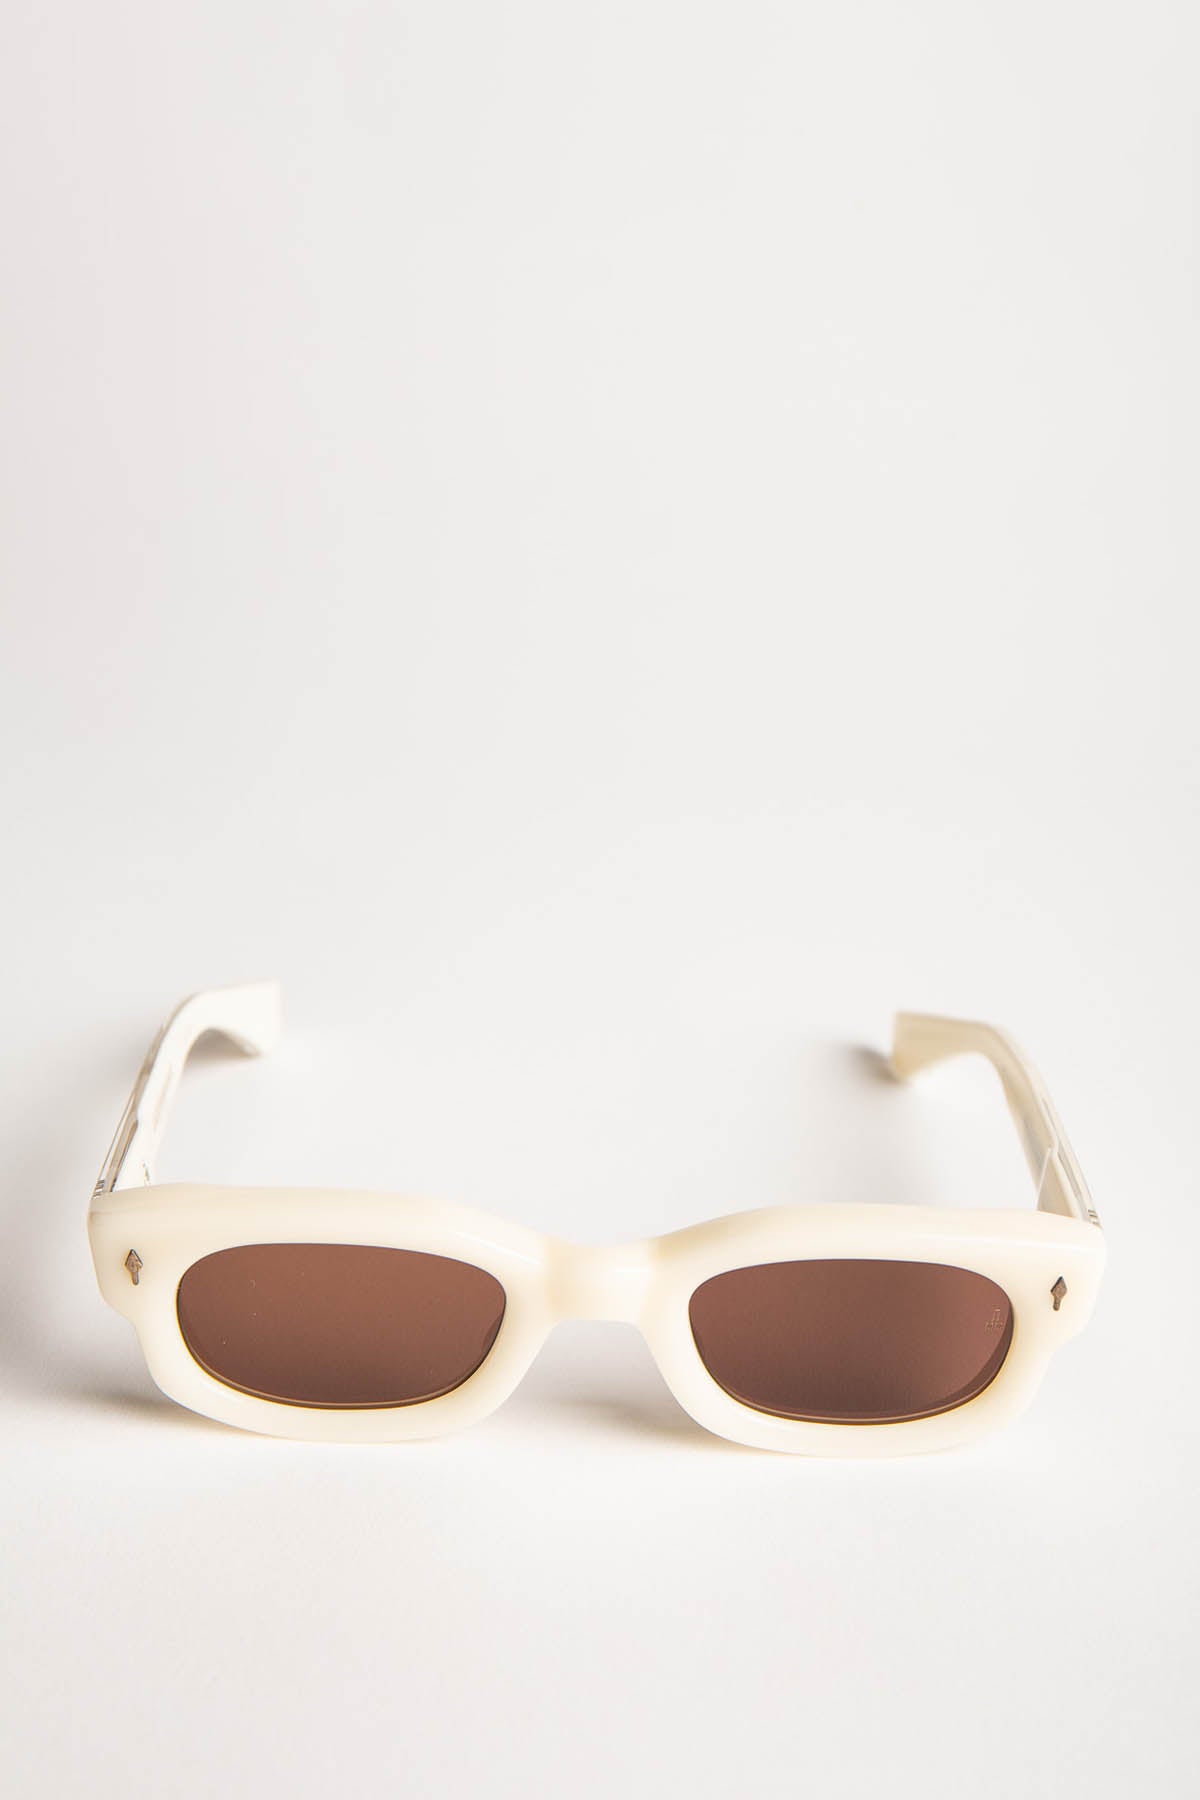 JACQUES MARIE MAGE | WHISKEYCLONE SUNGLASSES